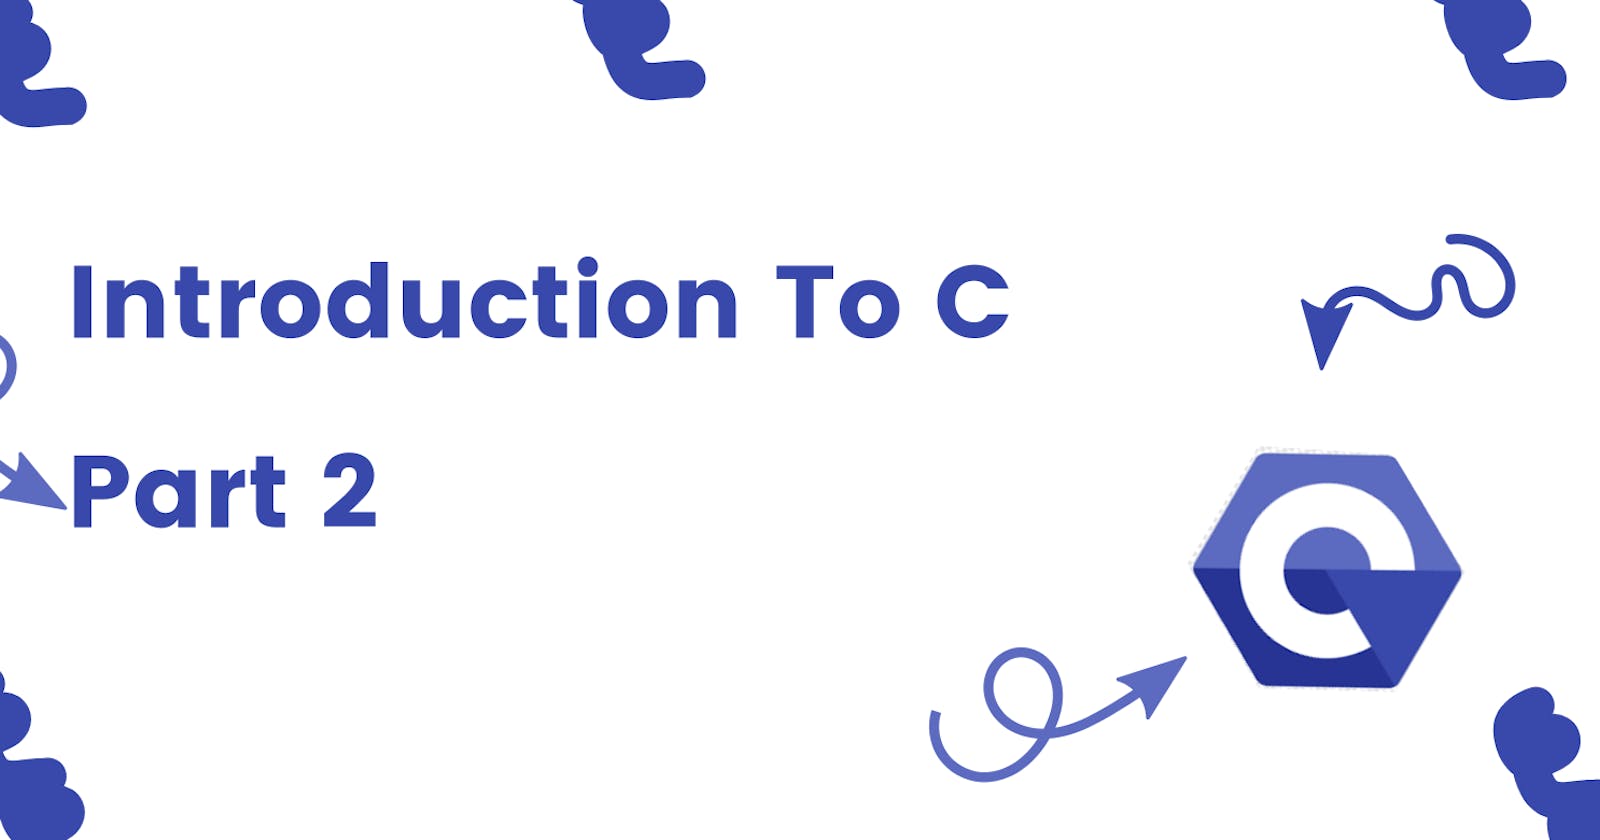 Introduction To C Part 2.